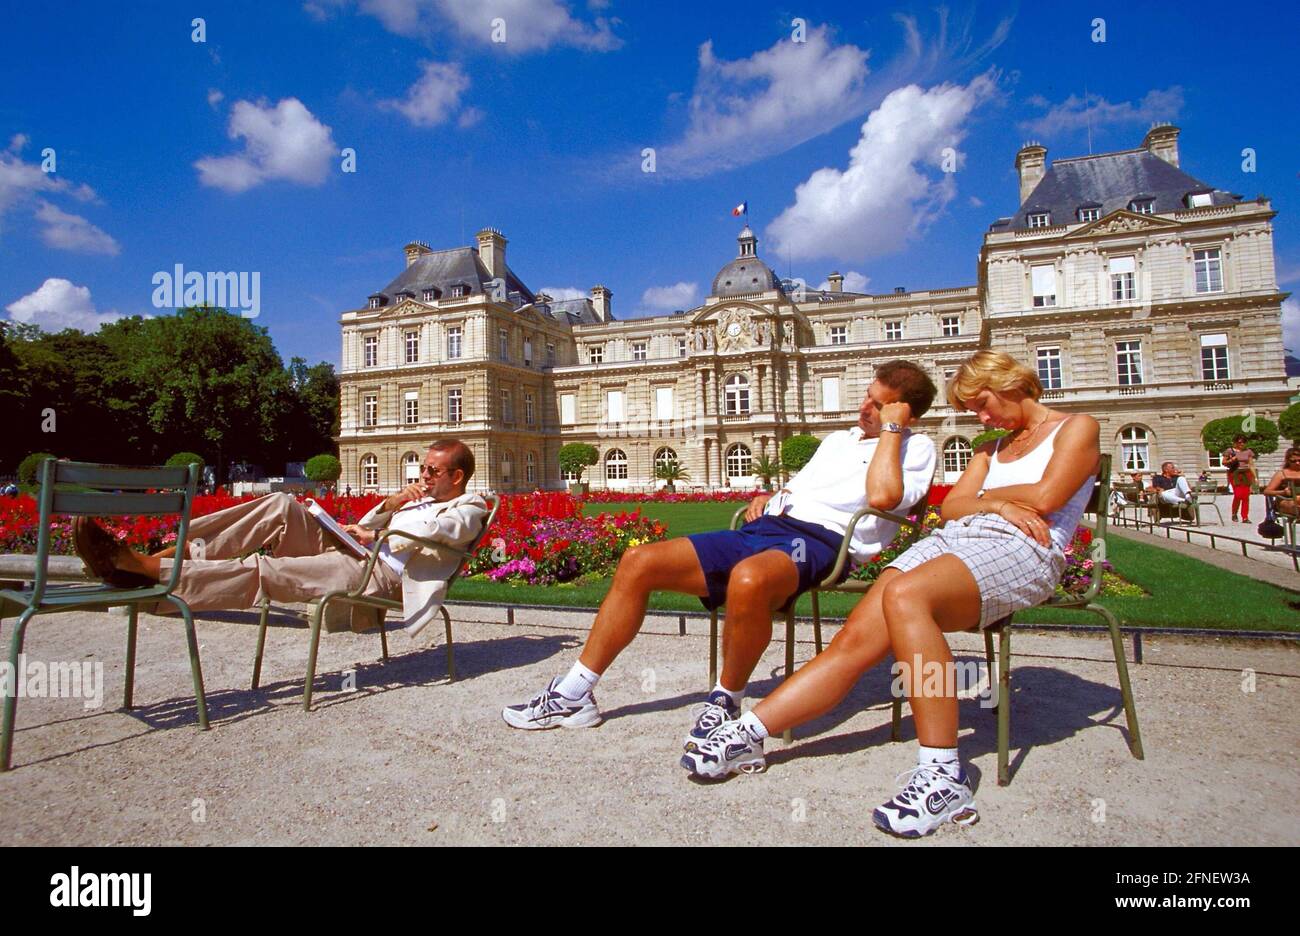 Tourists sunbathe in the garden of the 'Palais du Luxembourg'. The palace  was built as a widow's residence for Henry IV's wife, Maria de Medici. She  wanted the palace to be designed